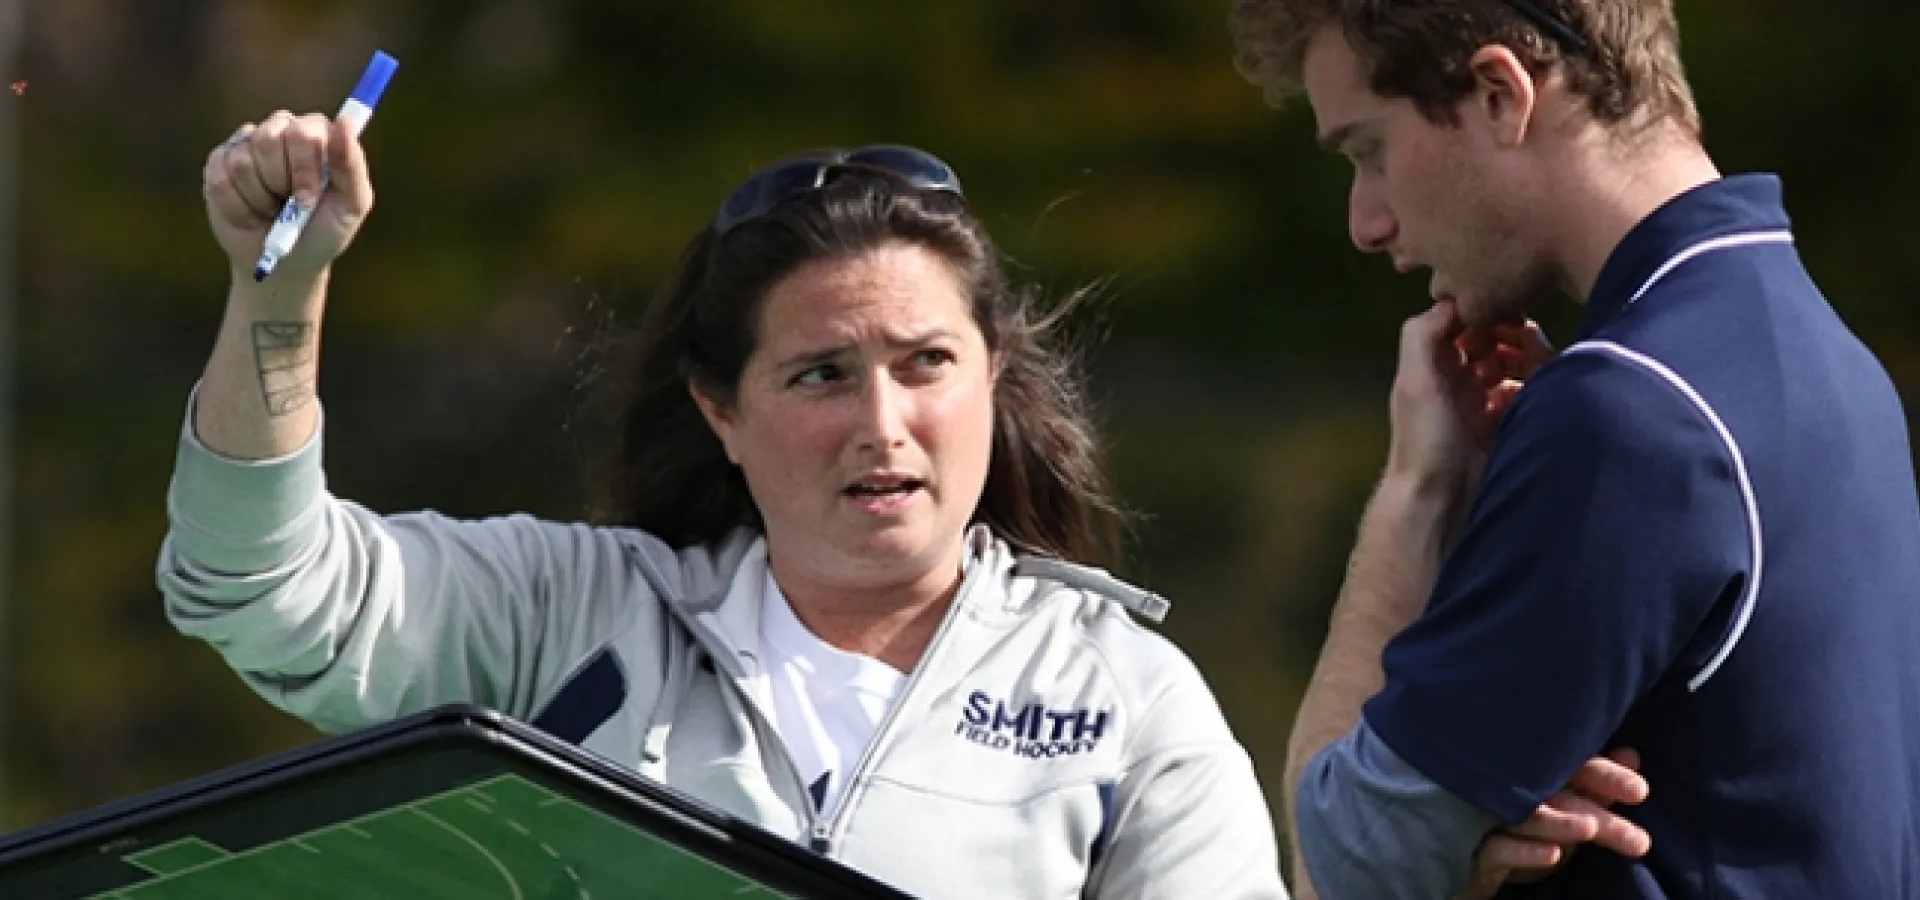 Smith College coaches discuss strategy on the field